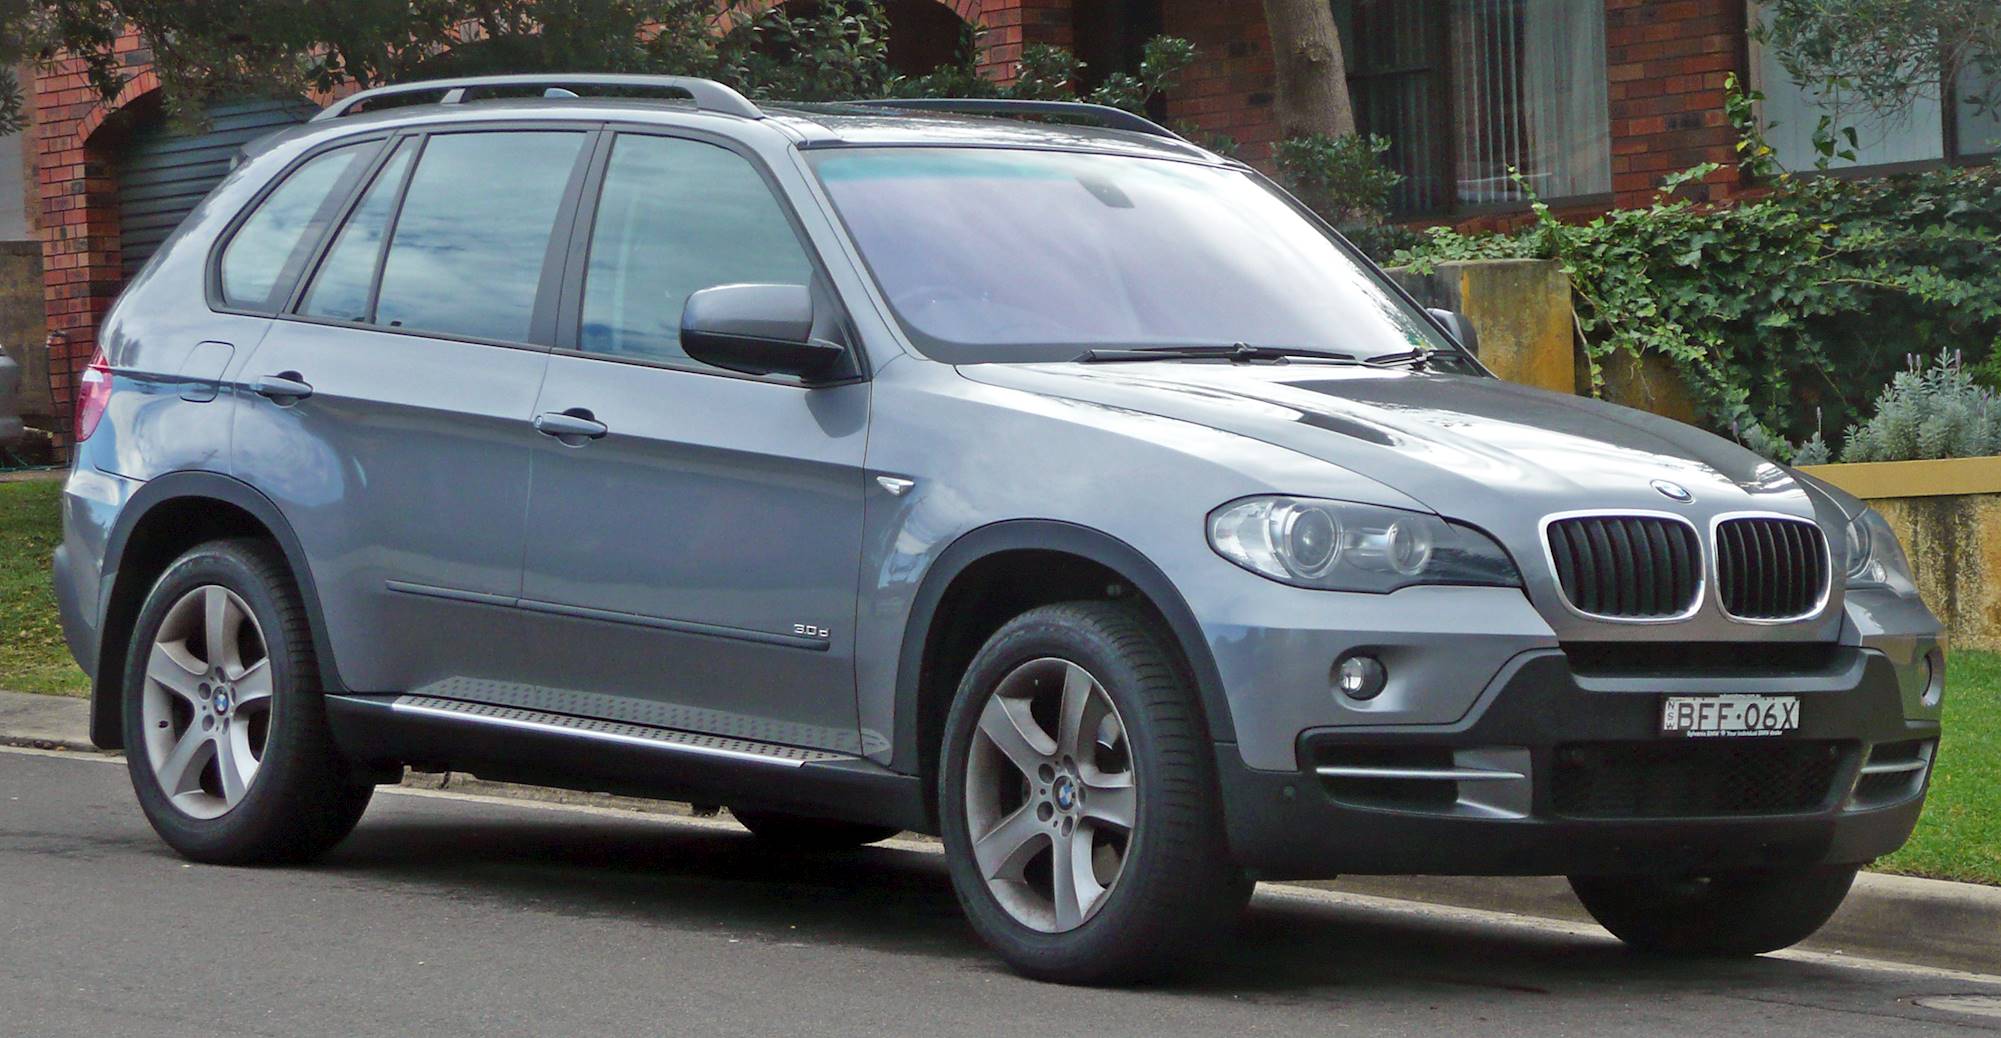 2008 Bmw X5 3.0 Si Towing Capacity